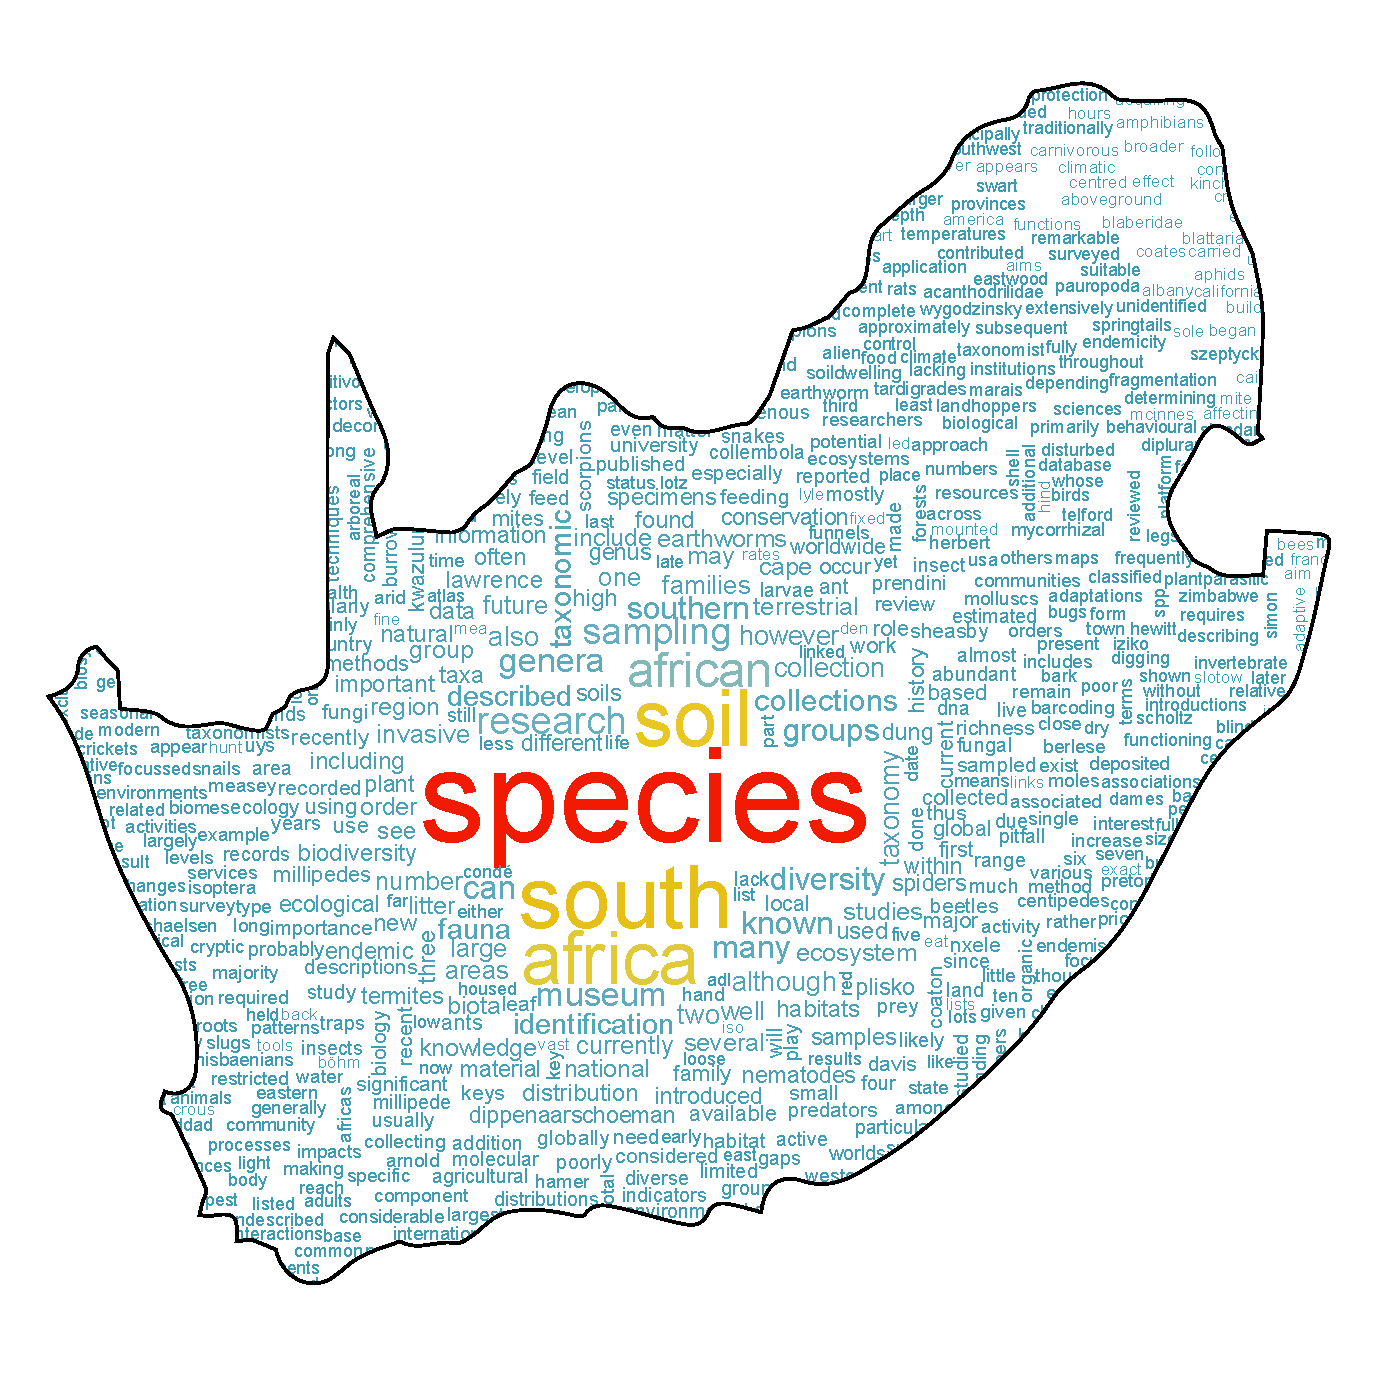 Soil species South Africa